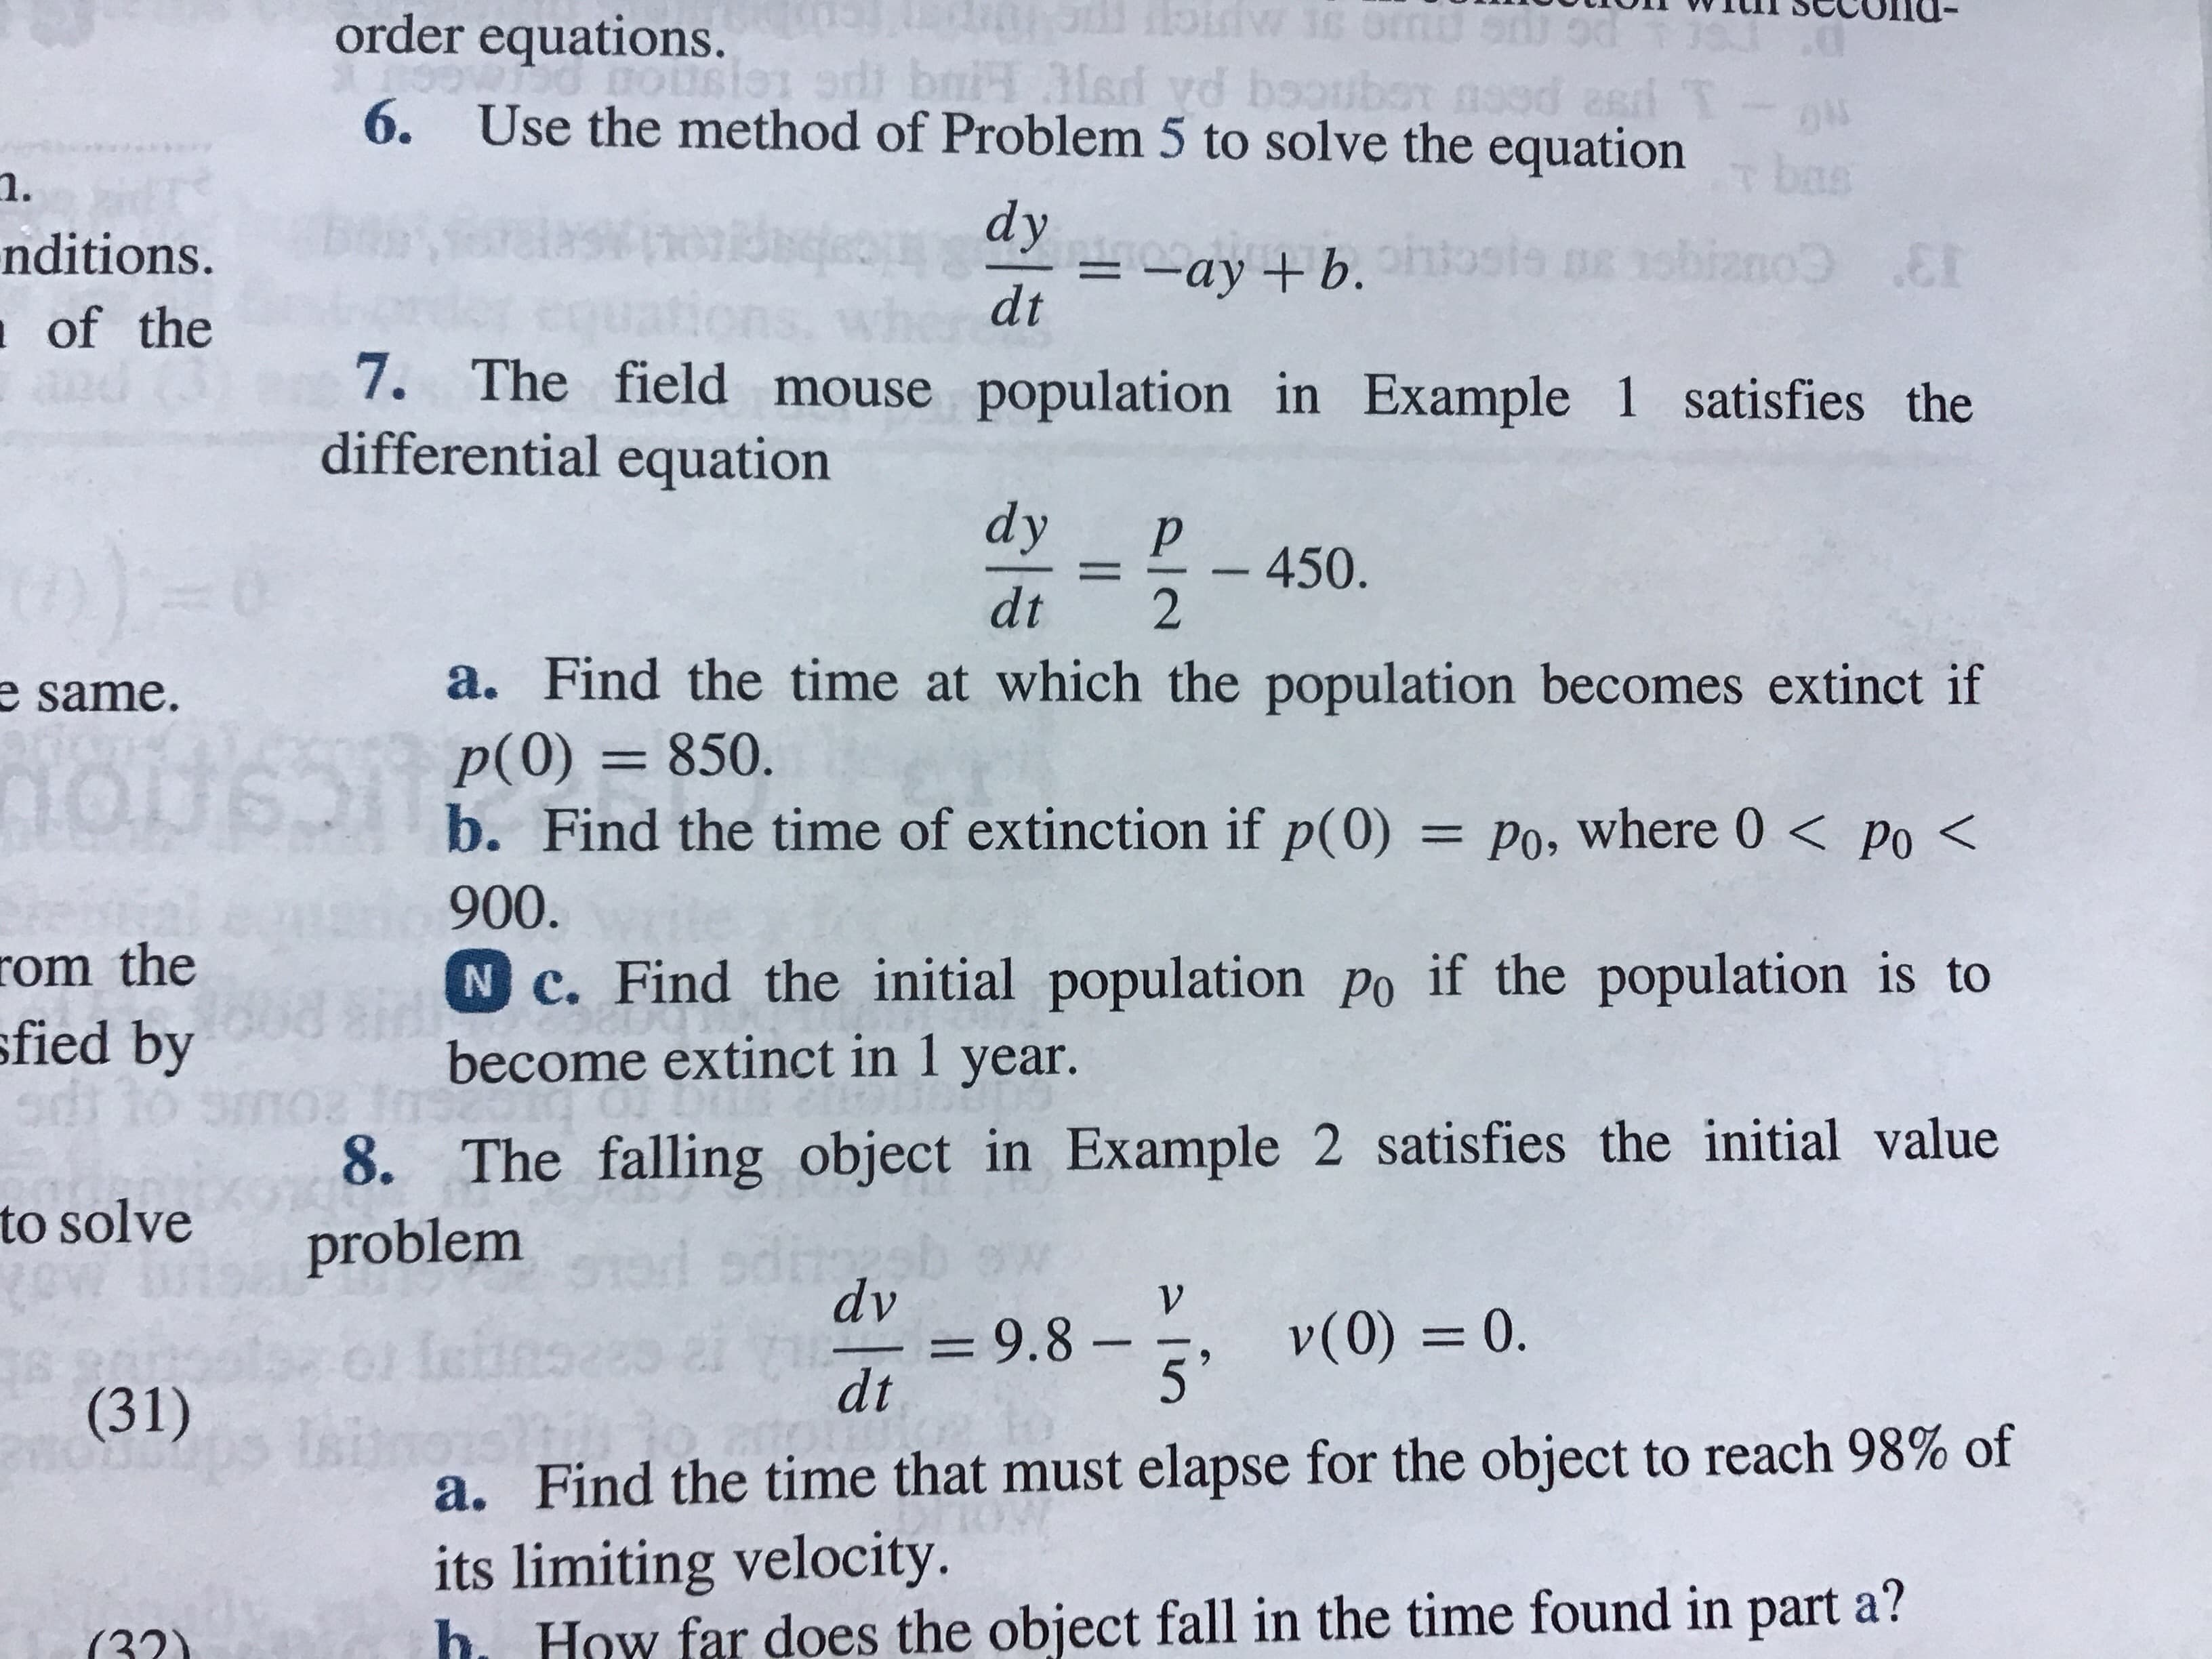 tioIn
vvrunSecolld-
order equations.
6.
Use the method of Problem 5 to solve the equation
1.
nditions.
of the
dy
dt ayb.
7. The field mouse population in Example 1 satisfies the
differential equation
dyP 450.
dt 2
a. Find the time at which the population becomes extinct if
p(O) 850.
b. Find the time of extinction if p(0) Po, where 0< po<
900
N c. Find the initial population po if the population is to
become extinct in 1 year
e
same.
om the
fied by
8. The falling object in Example 2 satisfies the initial value
to solve problem
dv
9.8 v0) 0
dt
(31)
a. Find the time that must elapse for the object to reach 98% of
its limiting velocity.
h How far does the object fall in the time found in part a?
(221
